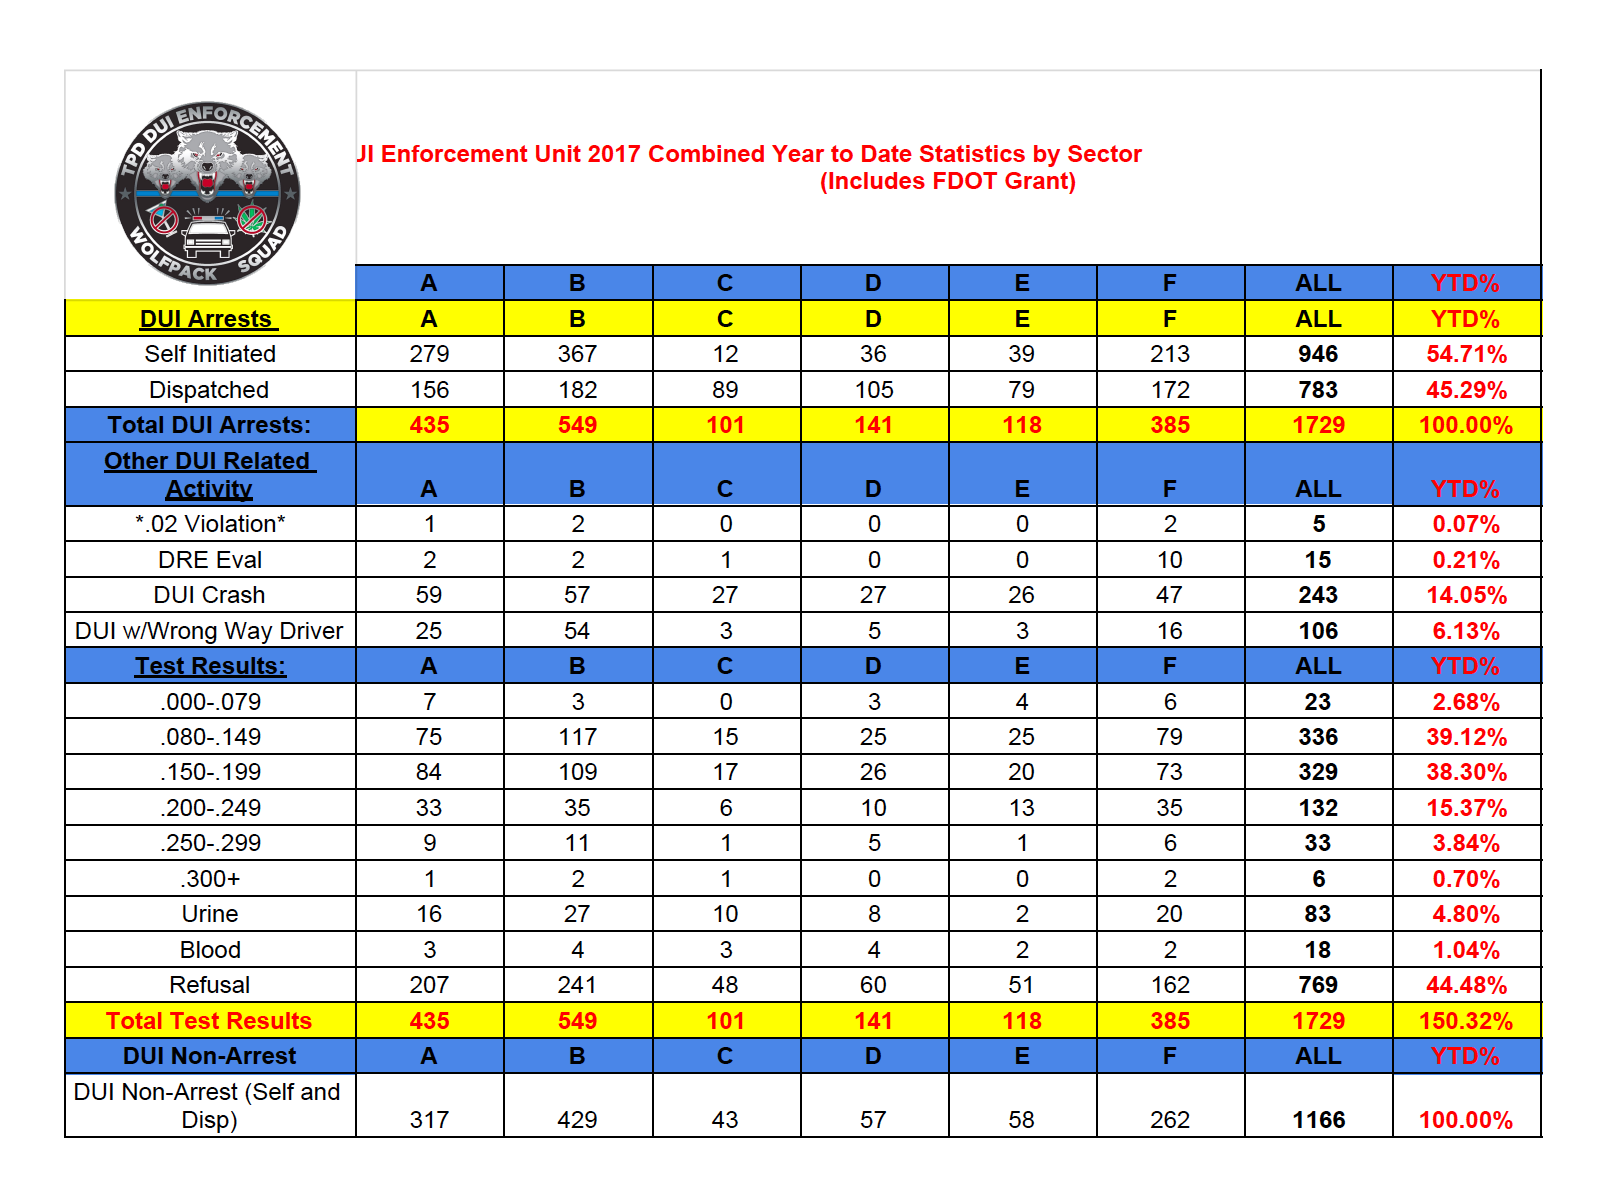 Tampa Police TPD DUI enforcement unit 2017 combined year statistics